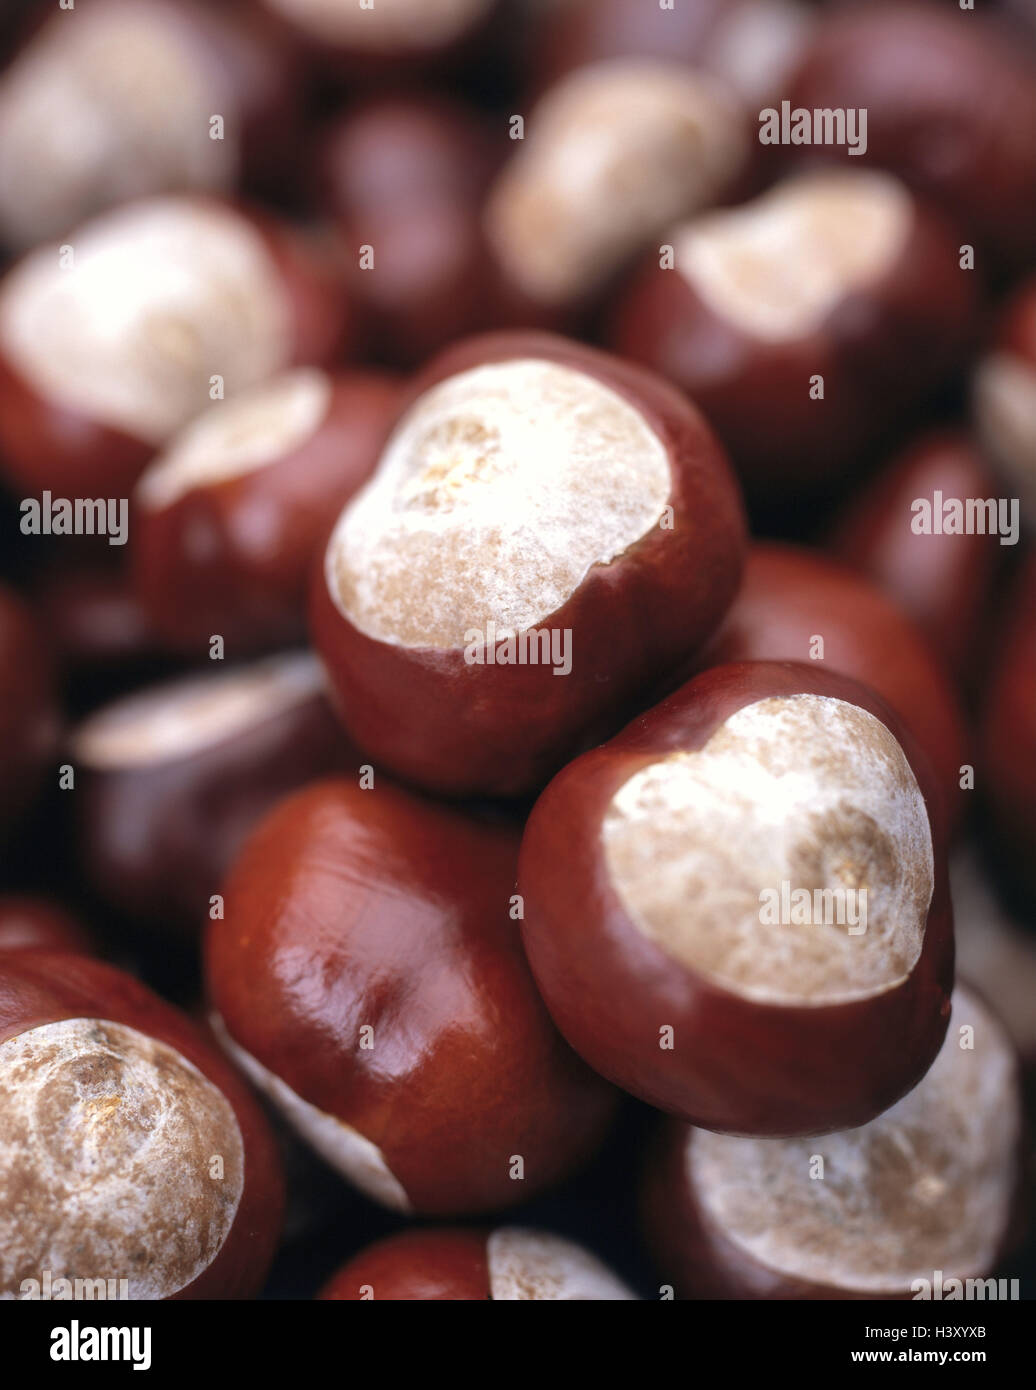 Chestnuts, red horse chestnut, Aesculus x carnea, autumn, meat Red horse chestnuts, Pavie, Aesculus rubicunda, horse chestnuts, chestnut, capsules, capsule fruits, semens, nature, season, harvest, collect, close up Stock Photo